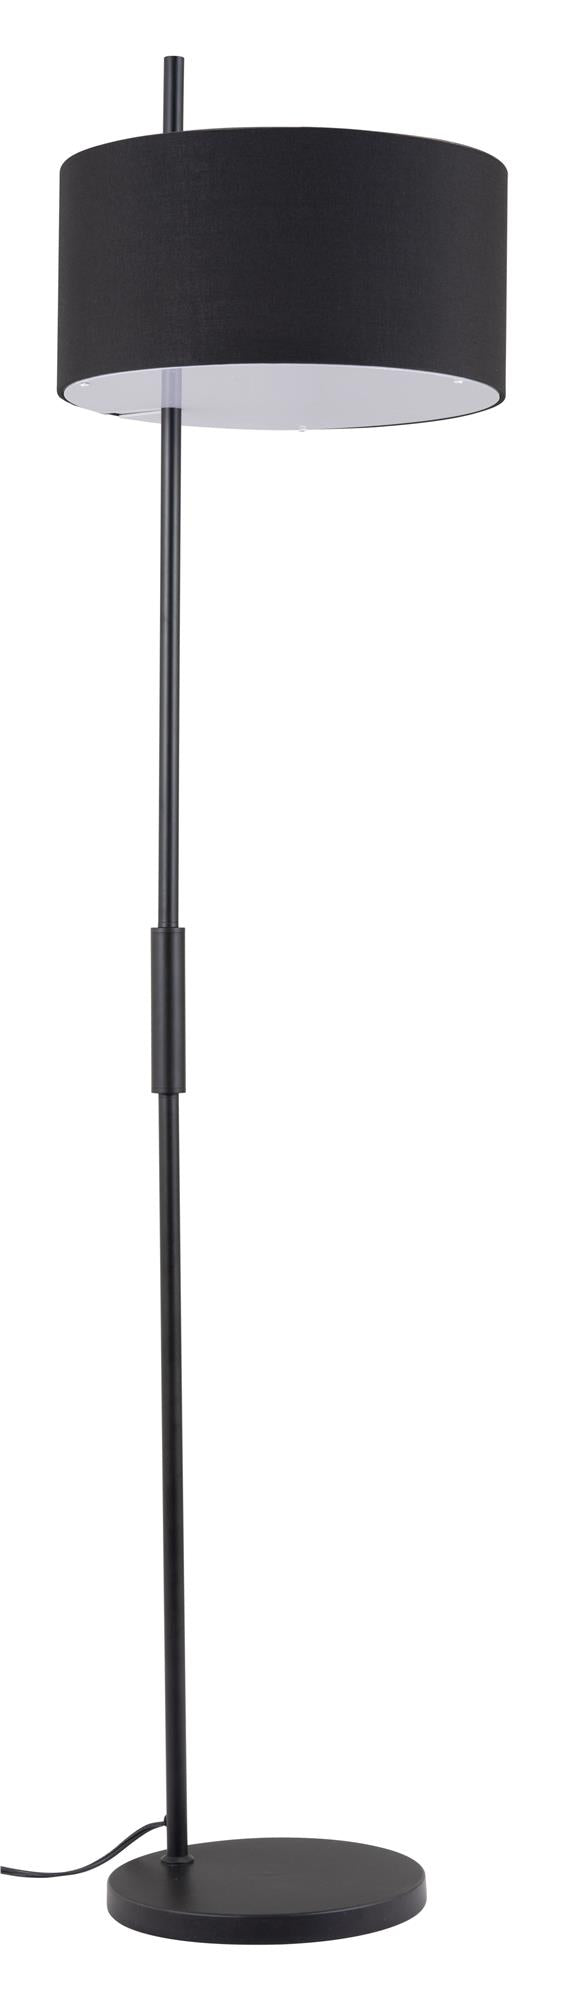 Brie Floor Lamp with Dimmer Option  -  N/A